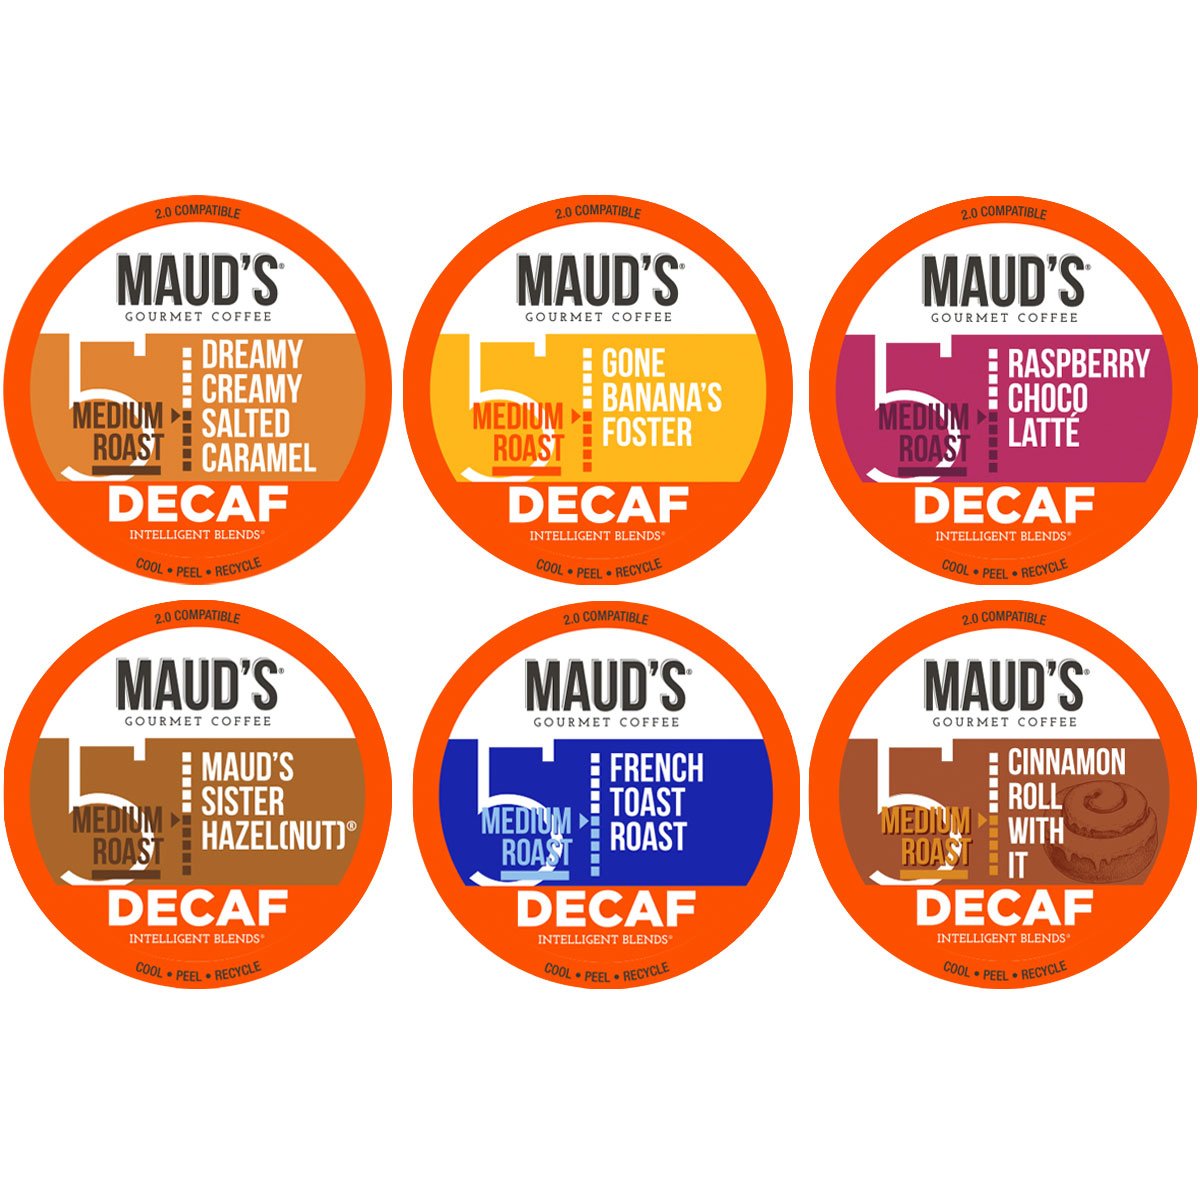 Maud's Decaf Flavored Coffee Pods Sampler Variety Pack (6 Flavors) - 48 Pods